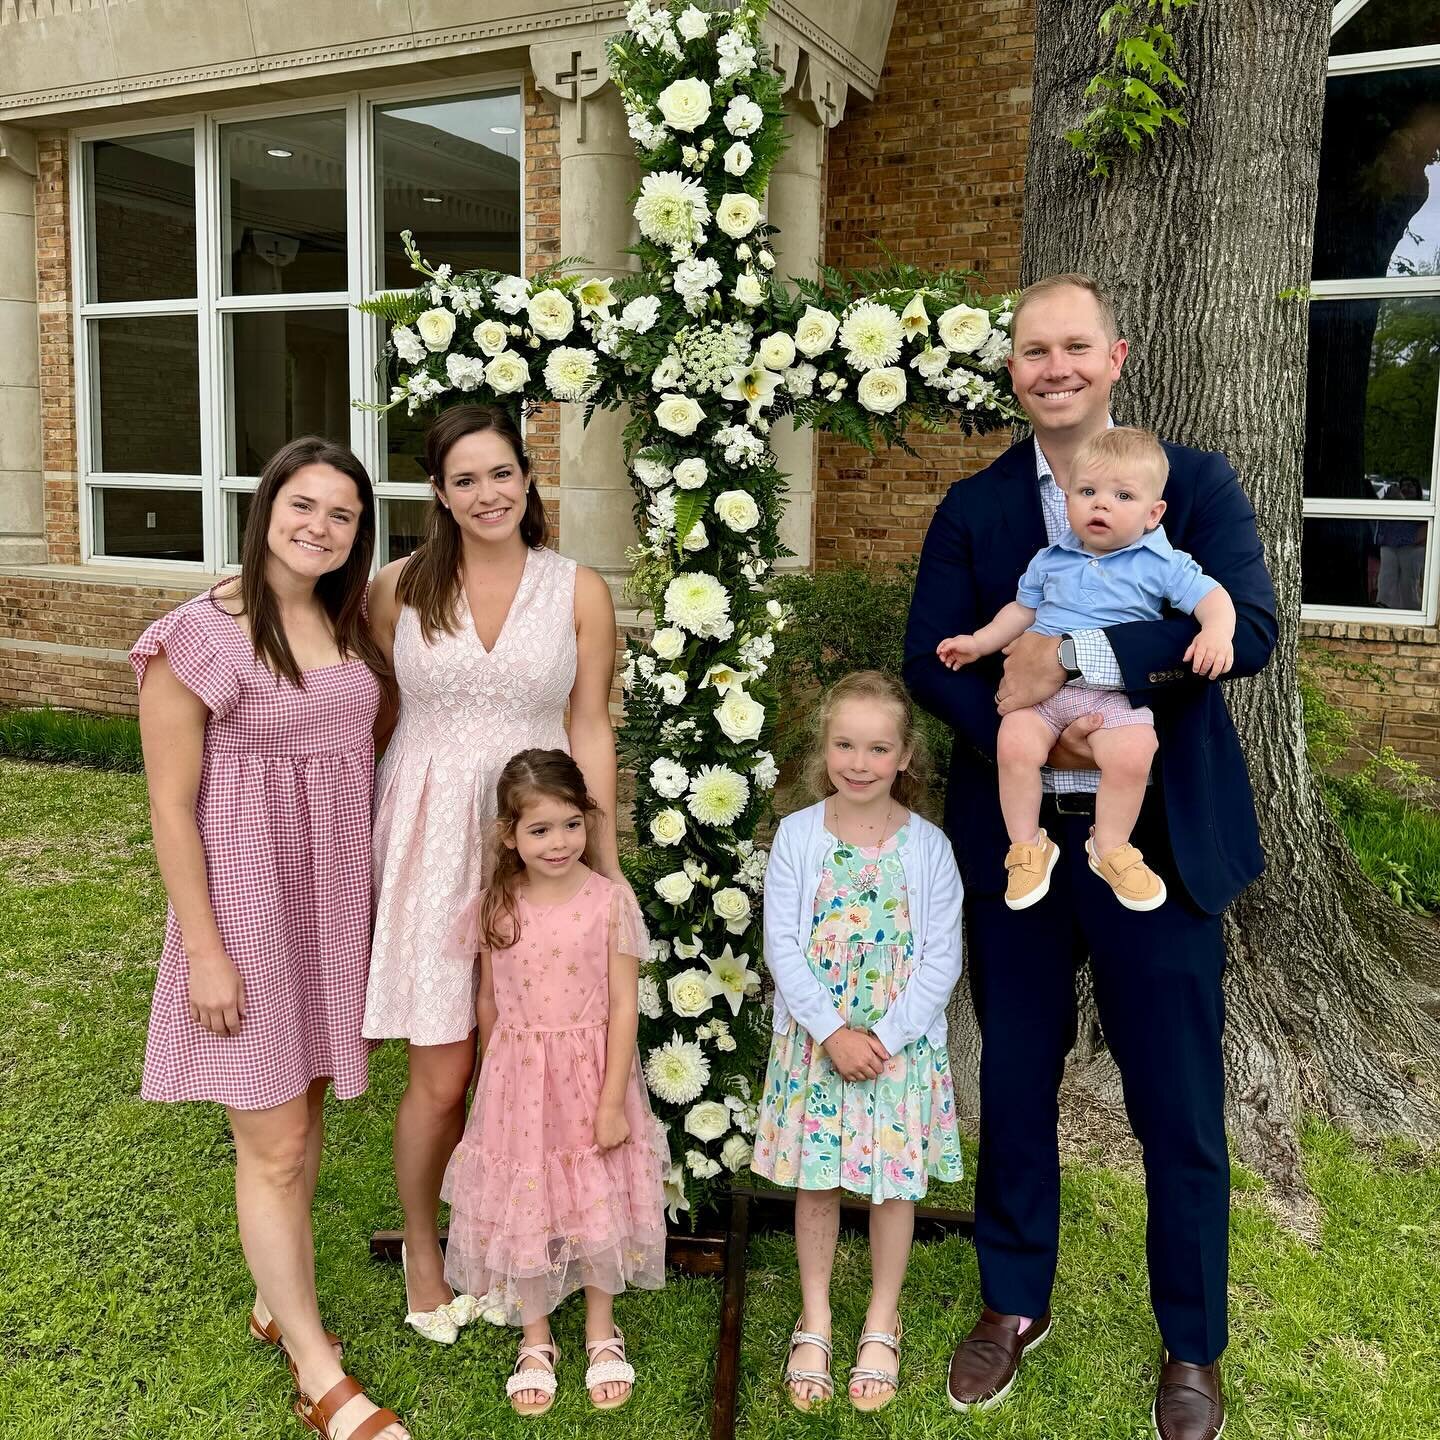 He is Risen! Happy Easter! ✝️🤍🙌🏻

&ldquo;The angel answered the women, &ldquo;Don&rsquo;t be afraid, for I. know that you seek Jesus, who has been crucified. He is not here, for he has risen, just like he said.&rdquo; 
Matthew 28:5-6